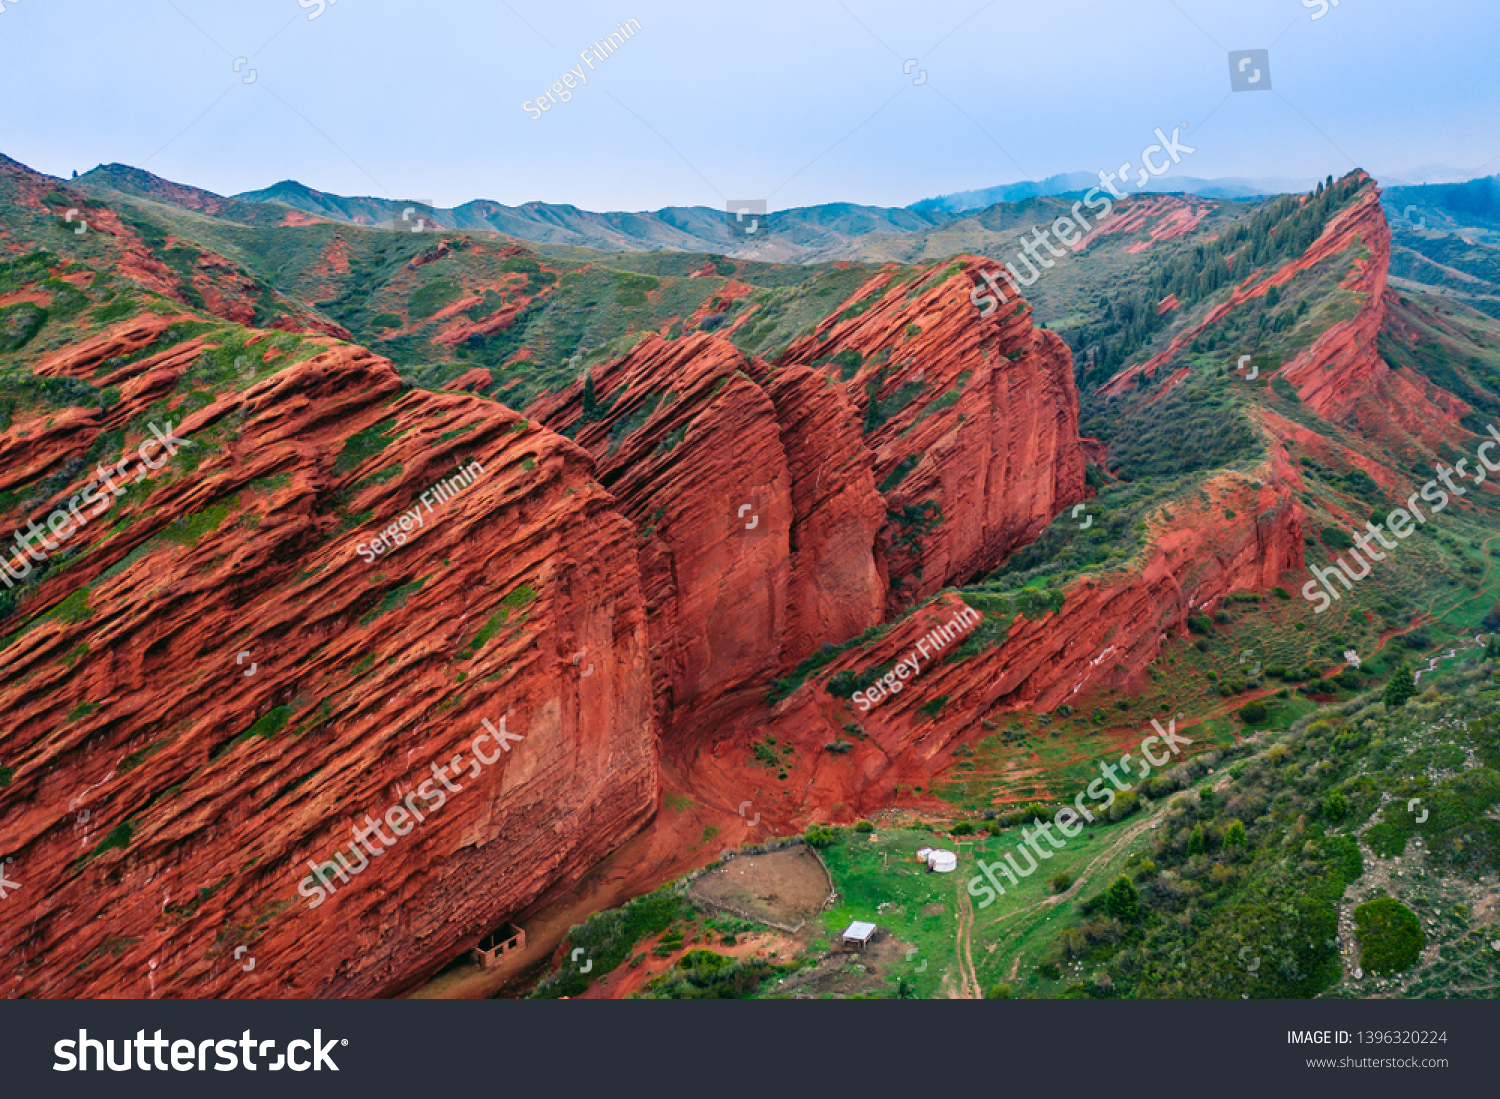 Jeti-Oguz gorge - one of the picturesque gorges in Kyrgyzstan #1396320224